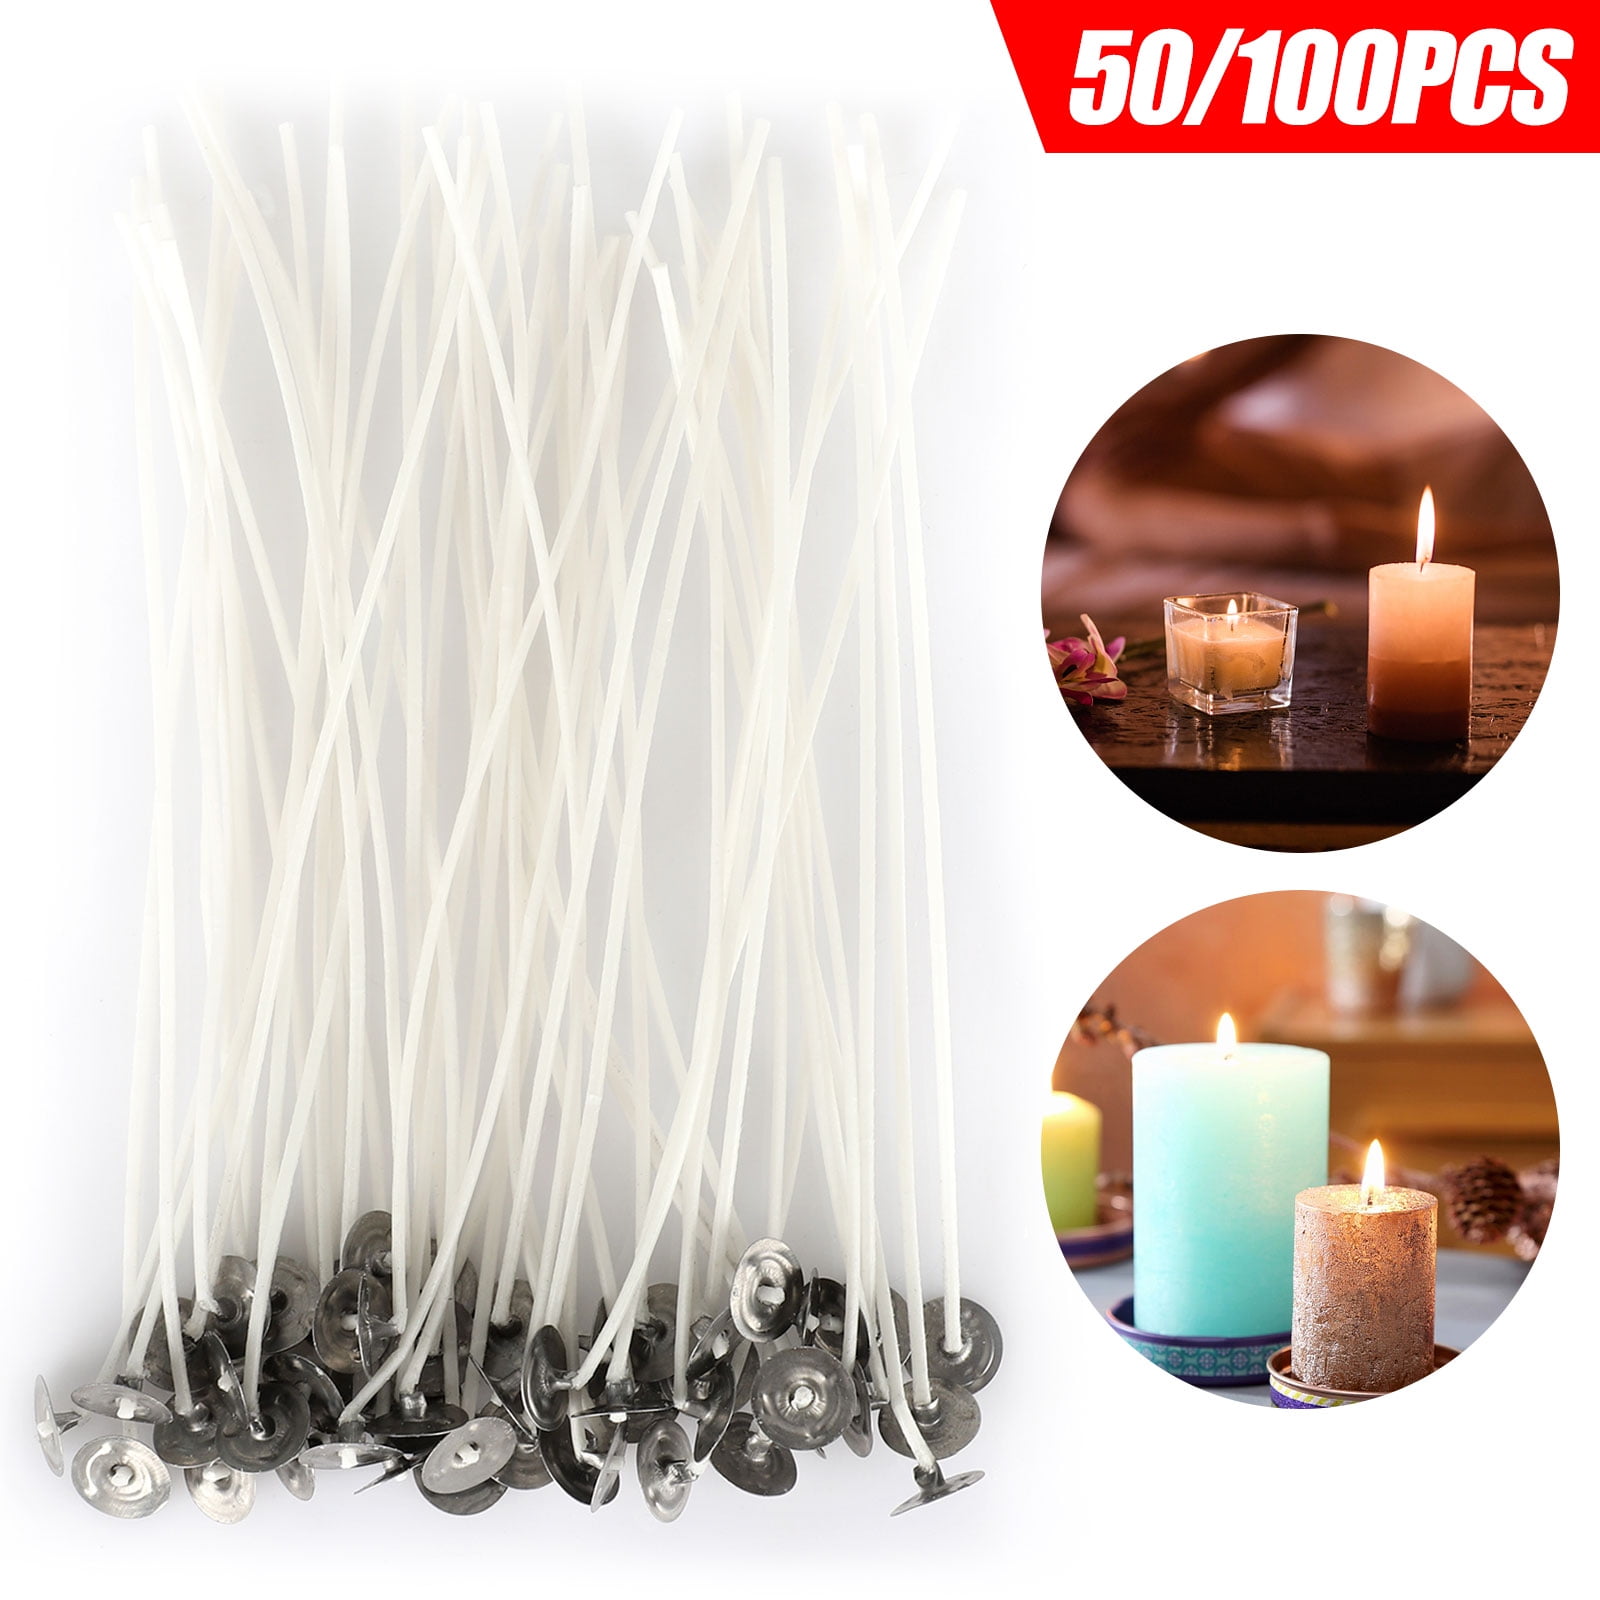 100 Pack Pre Waxed Candle Wicks With Sustainers For Making Tea Light Candles Set 